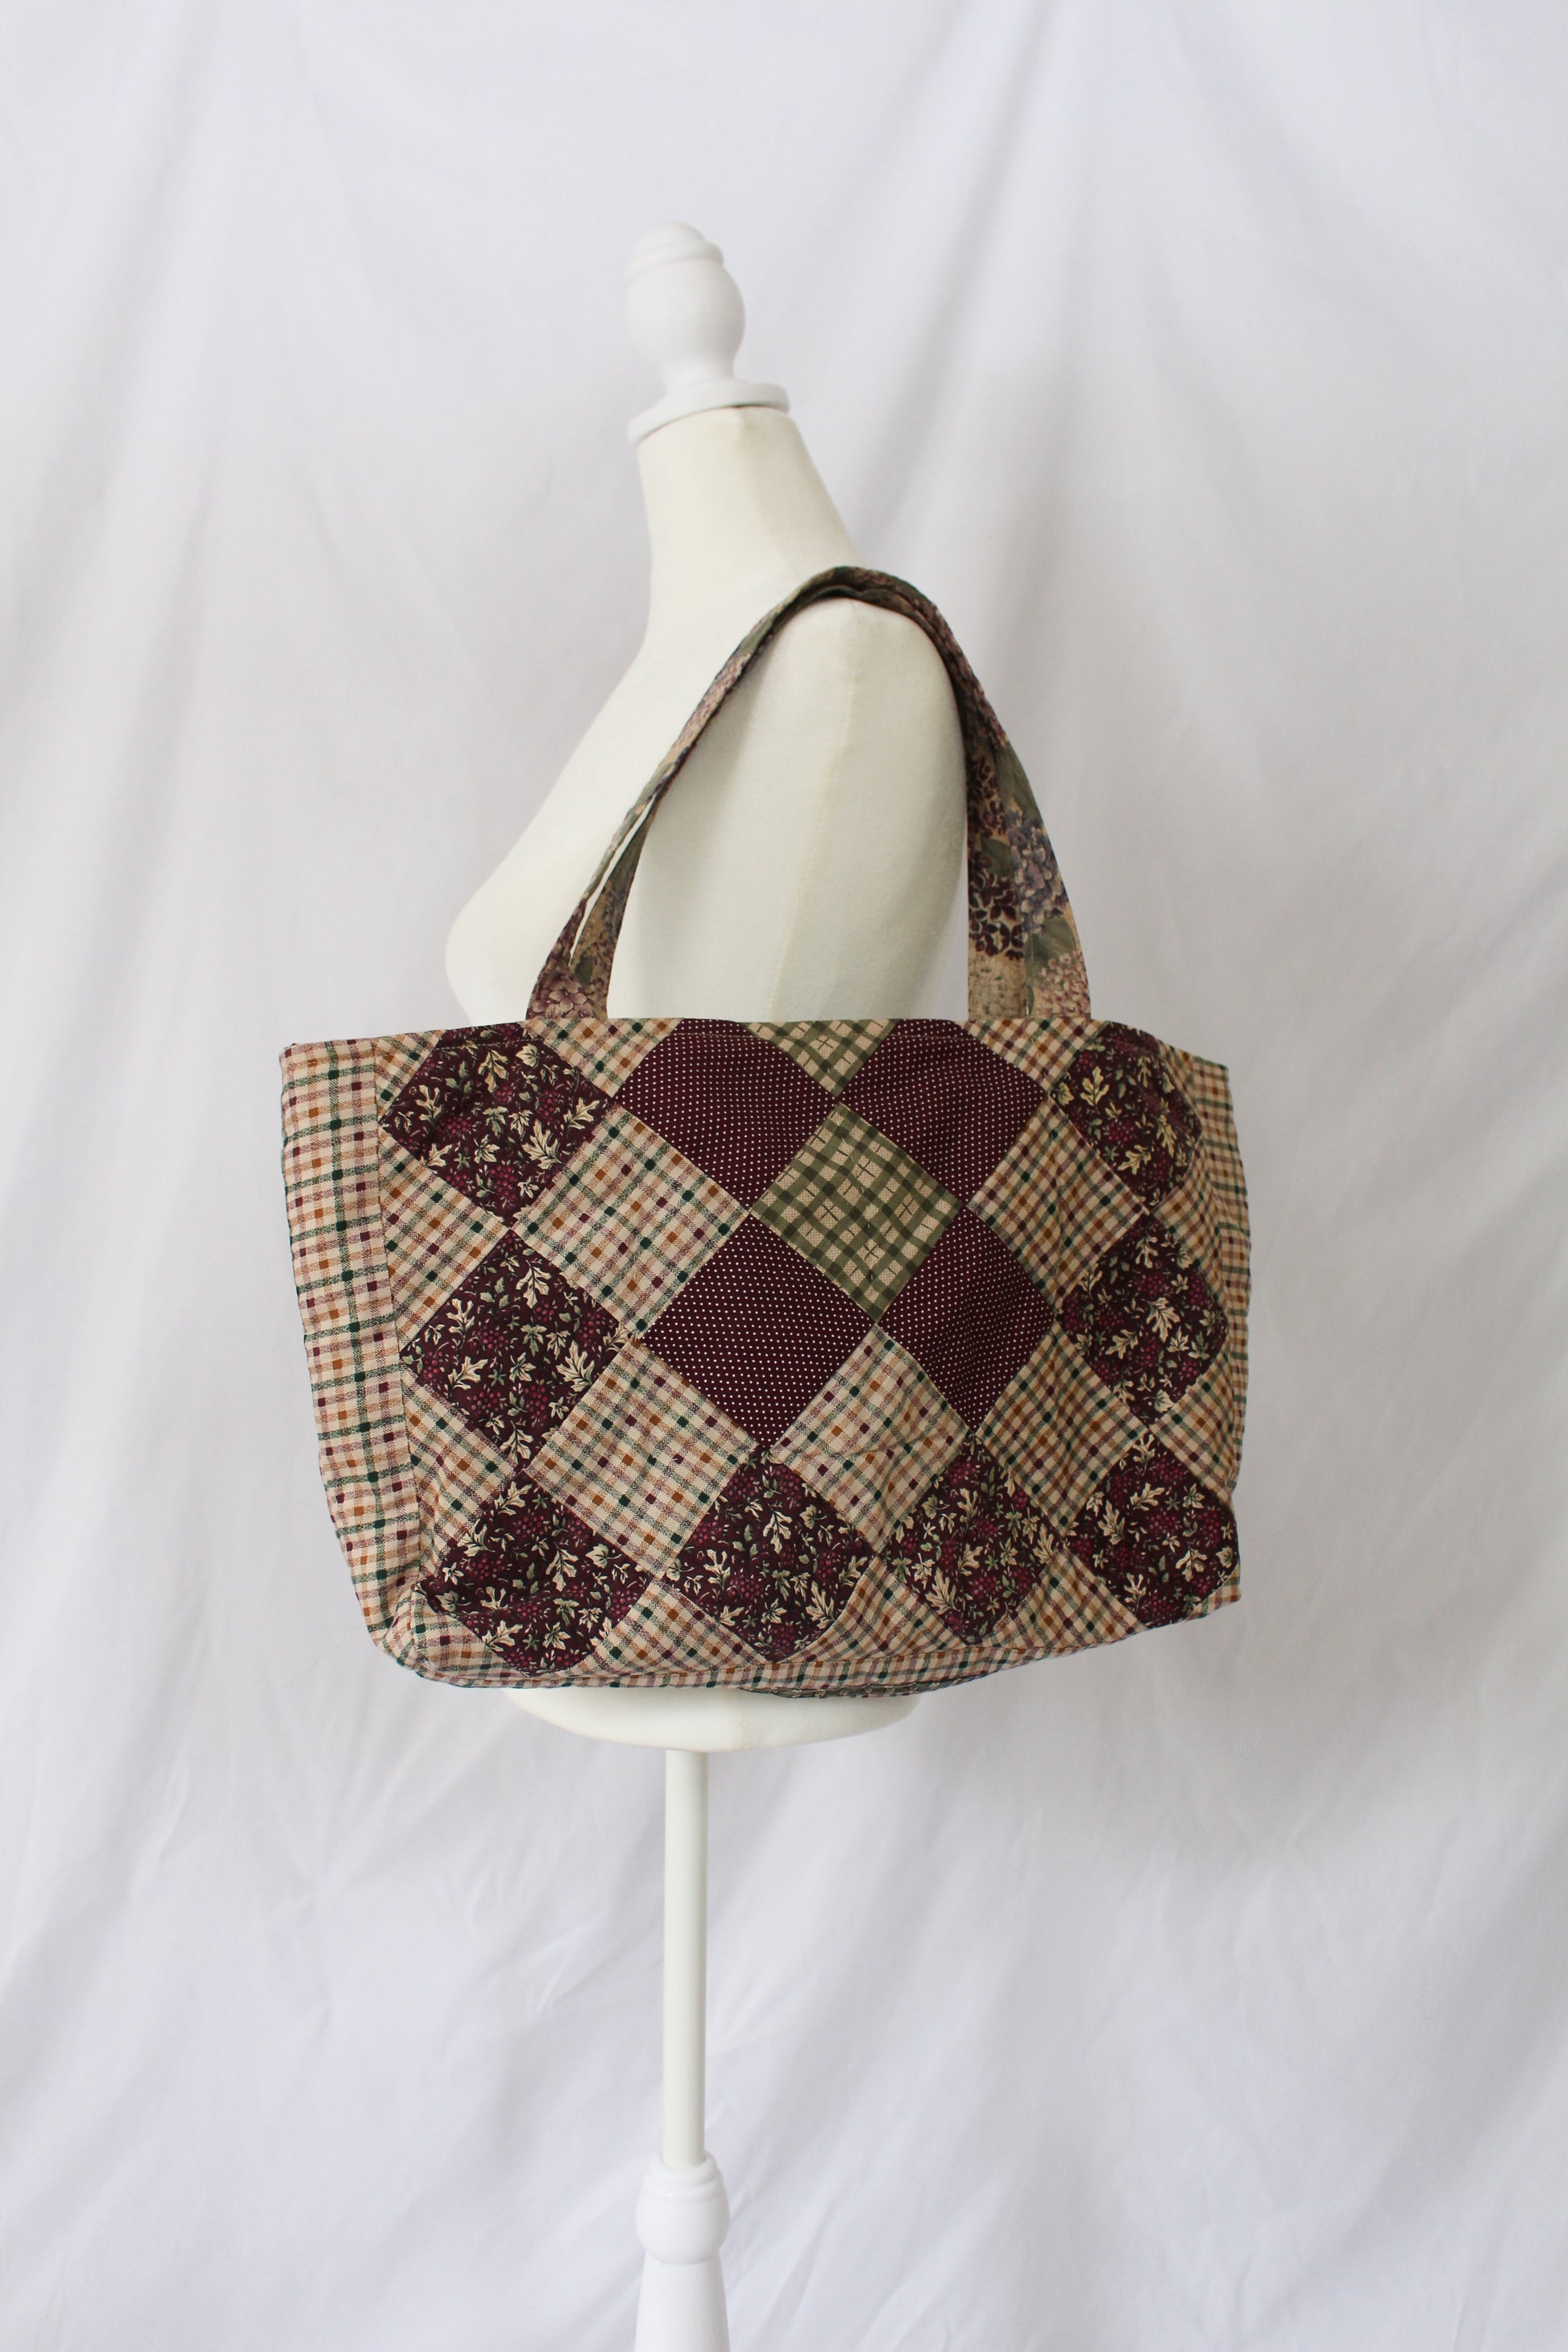 diamond check purse, diamond check plaid tote bag, handmade tote bag, tote made from recycled quilt, quilt tote bag